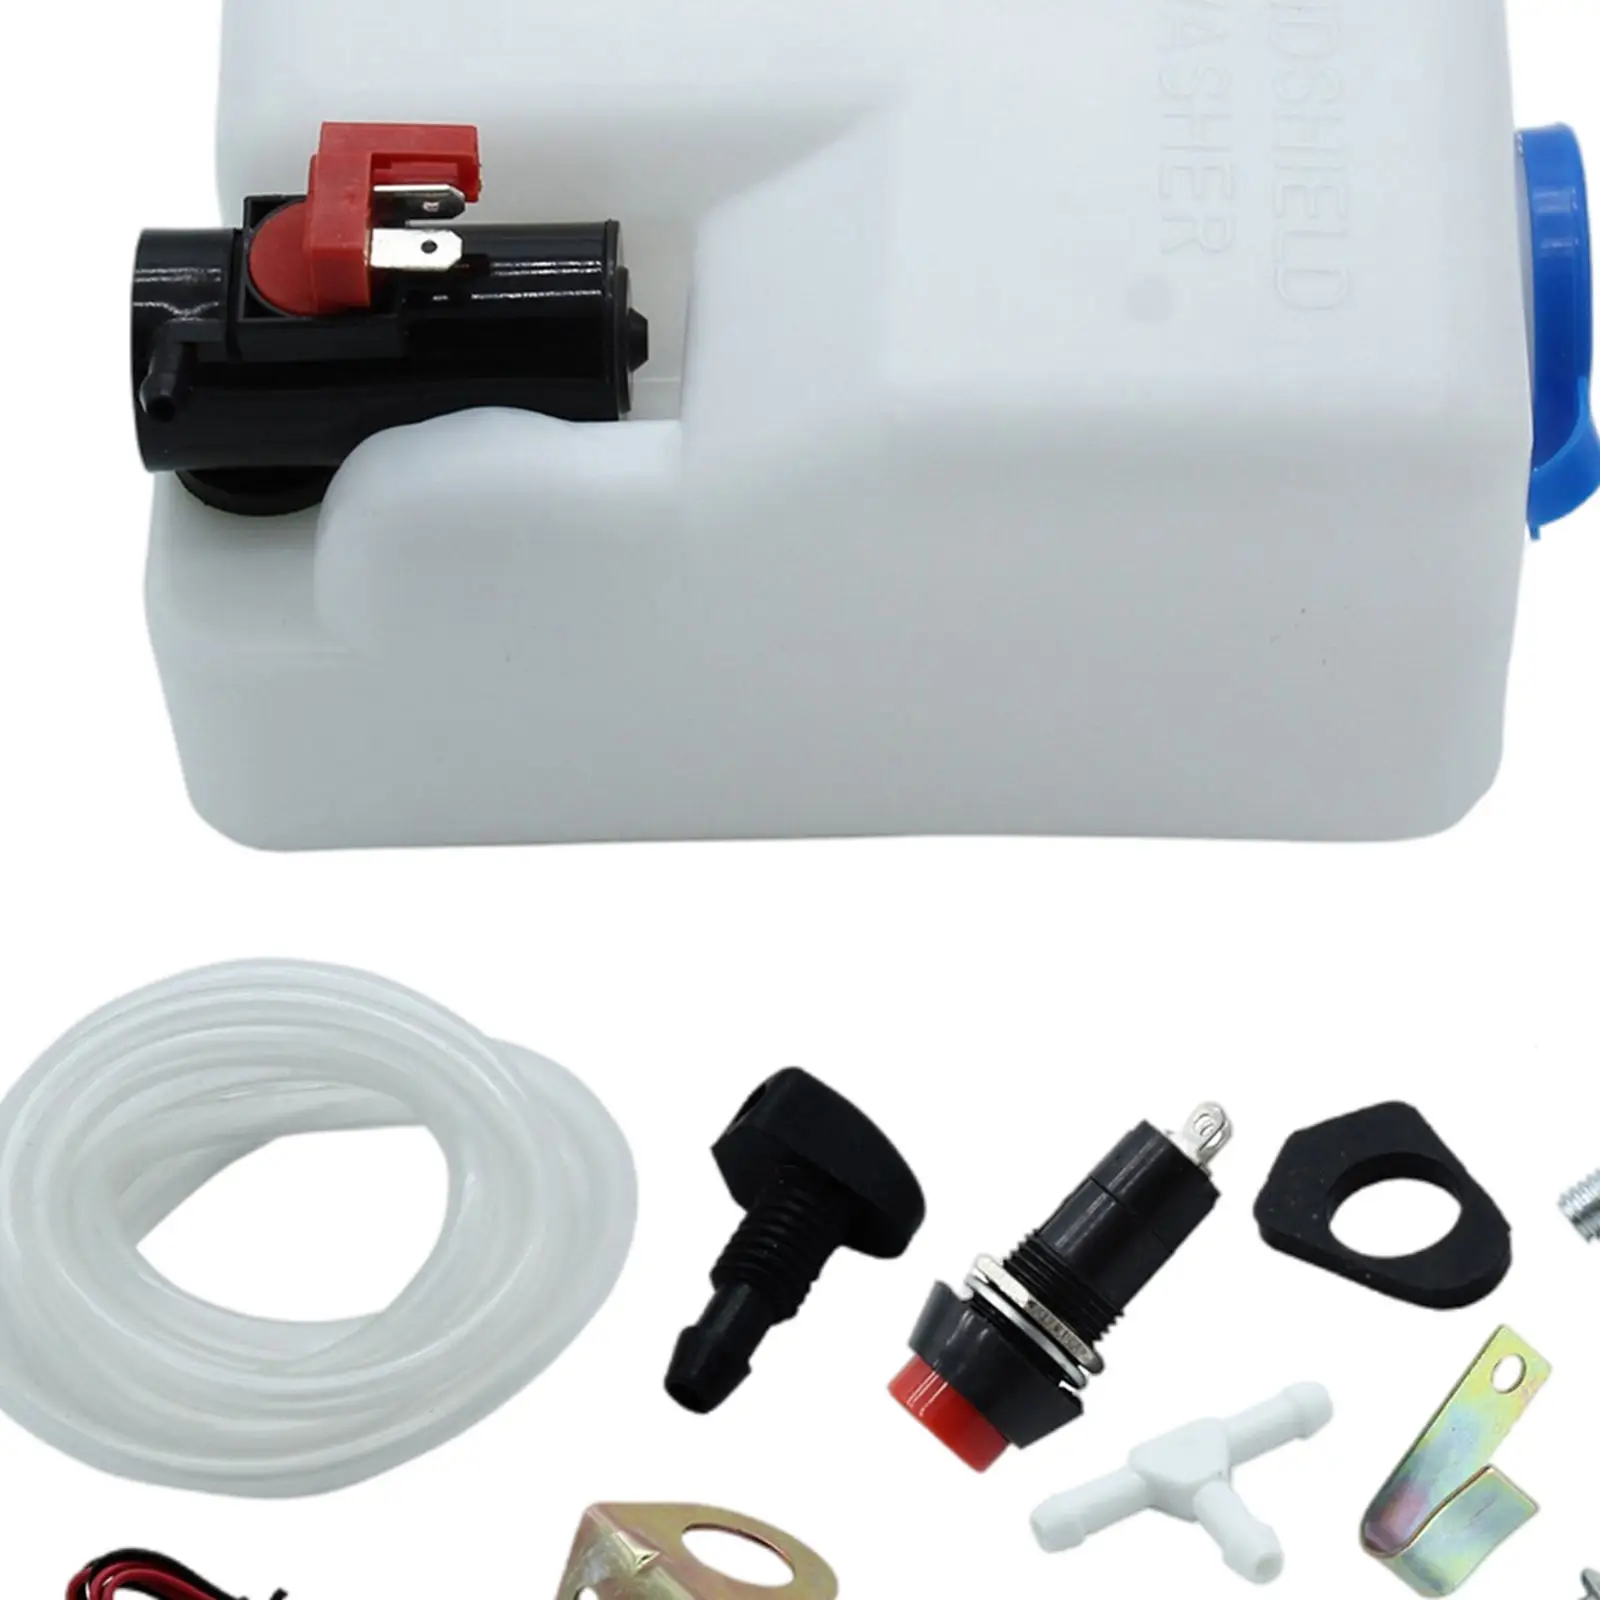 Windshield Washer Reservoir Sprayer Kit with Switch Clean Tank Fit for Car Truck